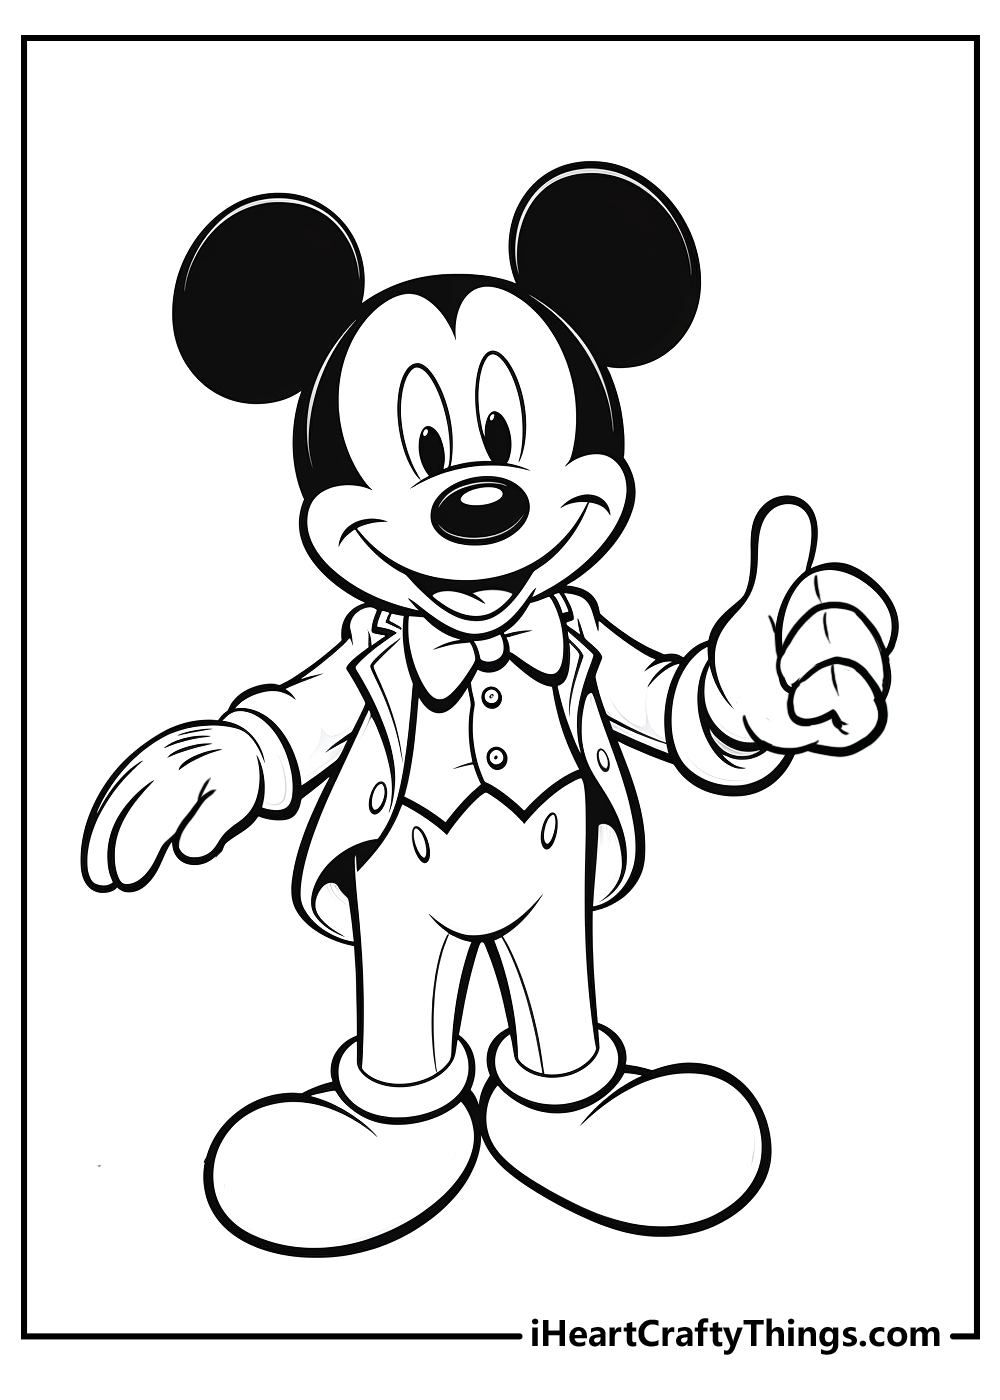 mickey mouse drawing colour - Clip Art Library